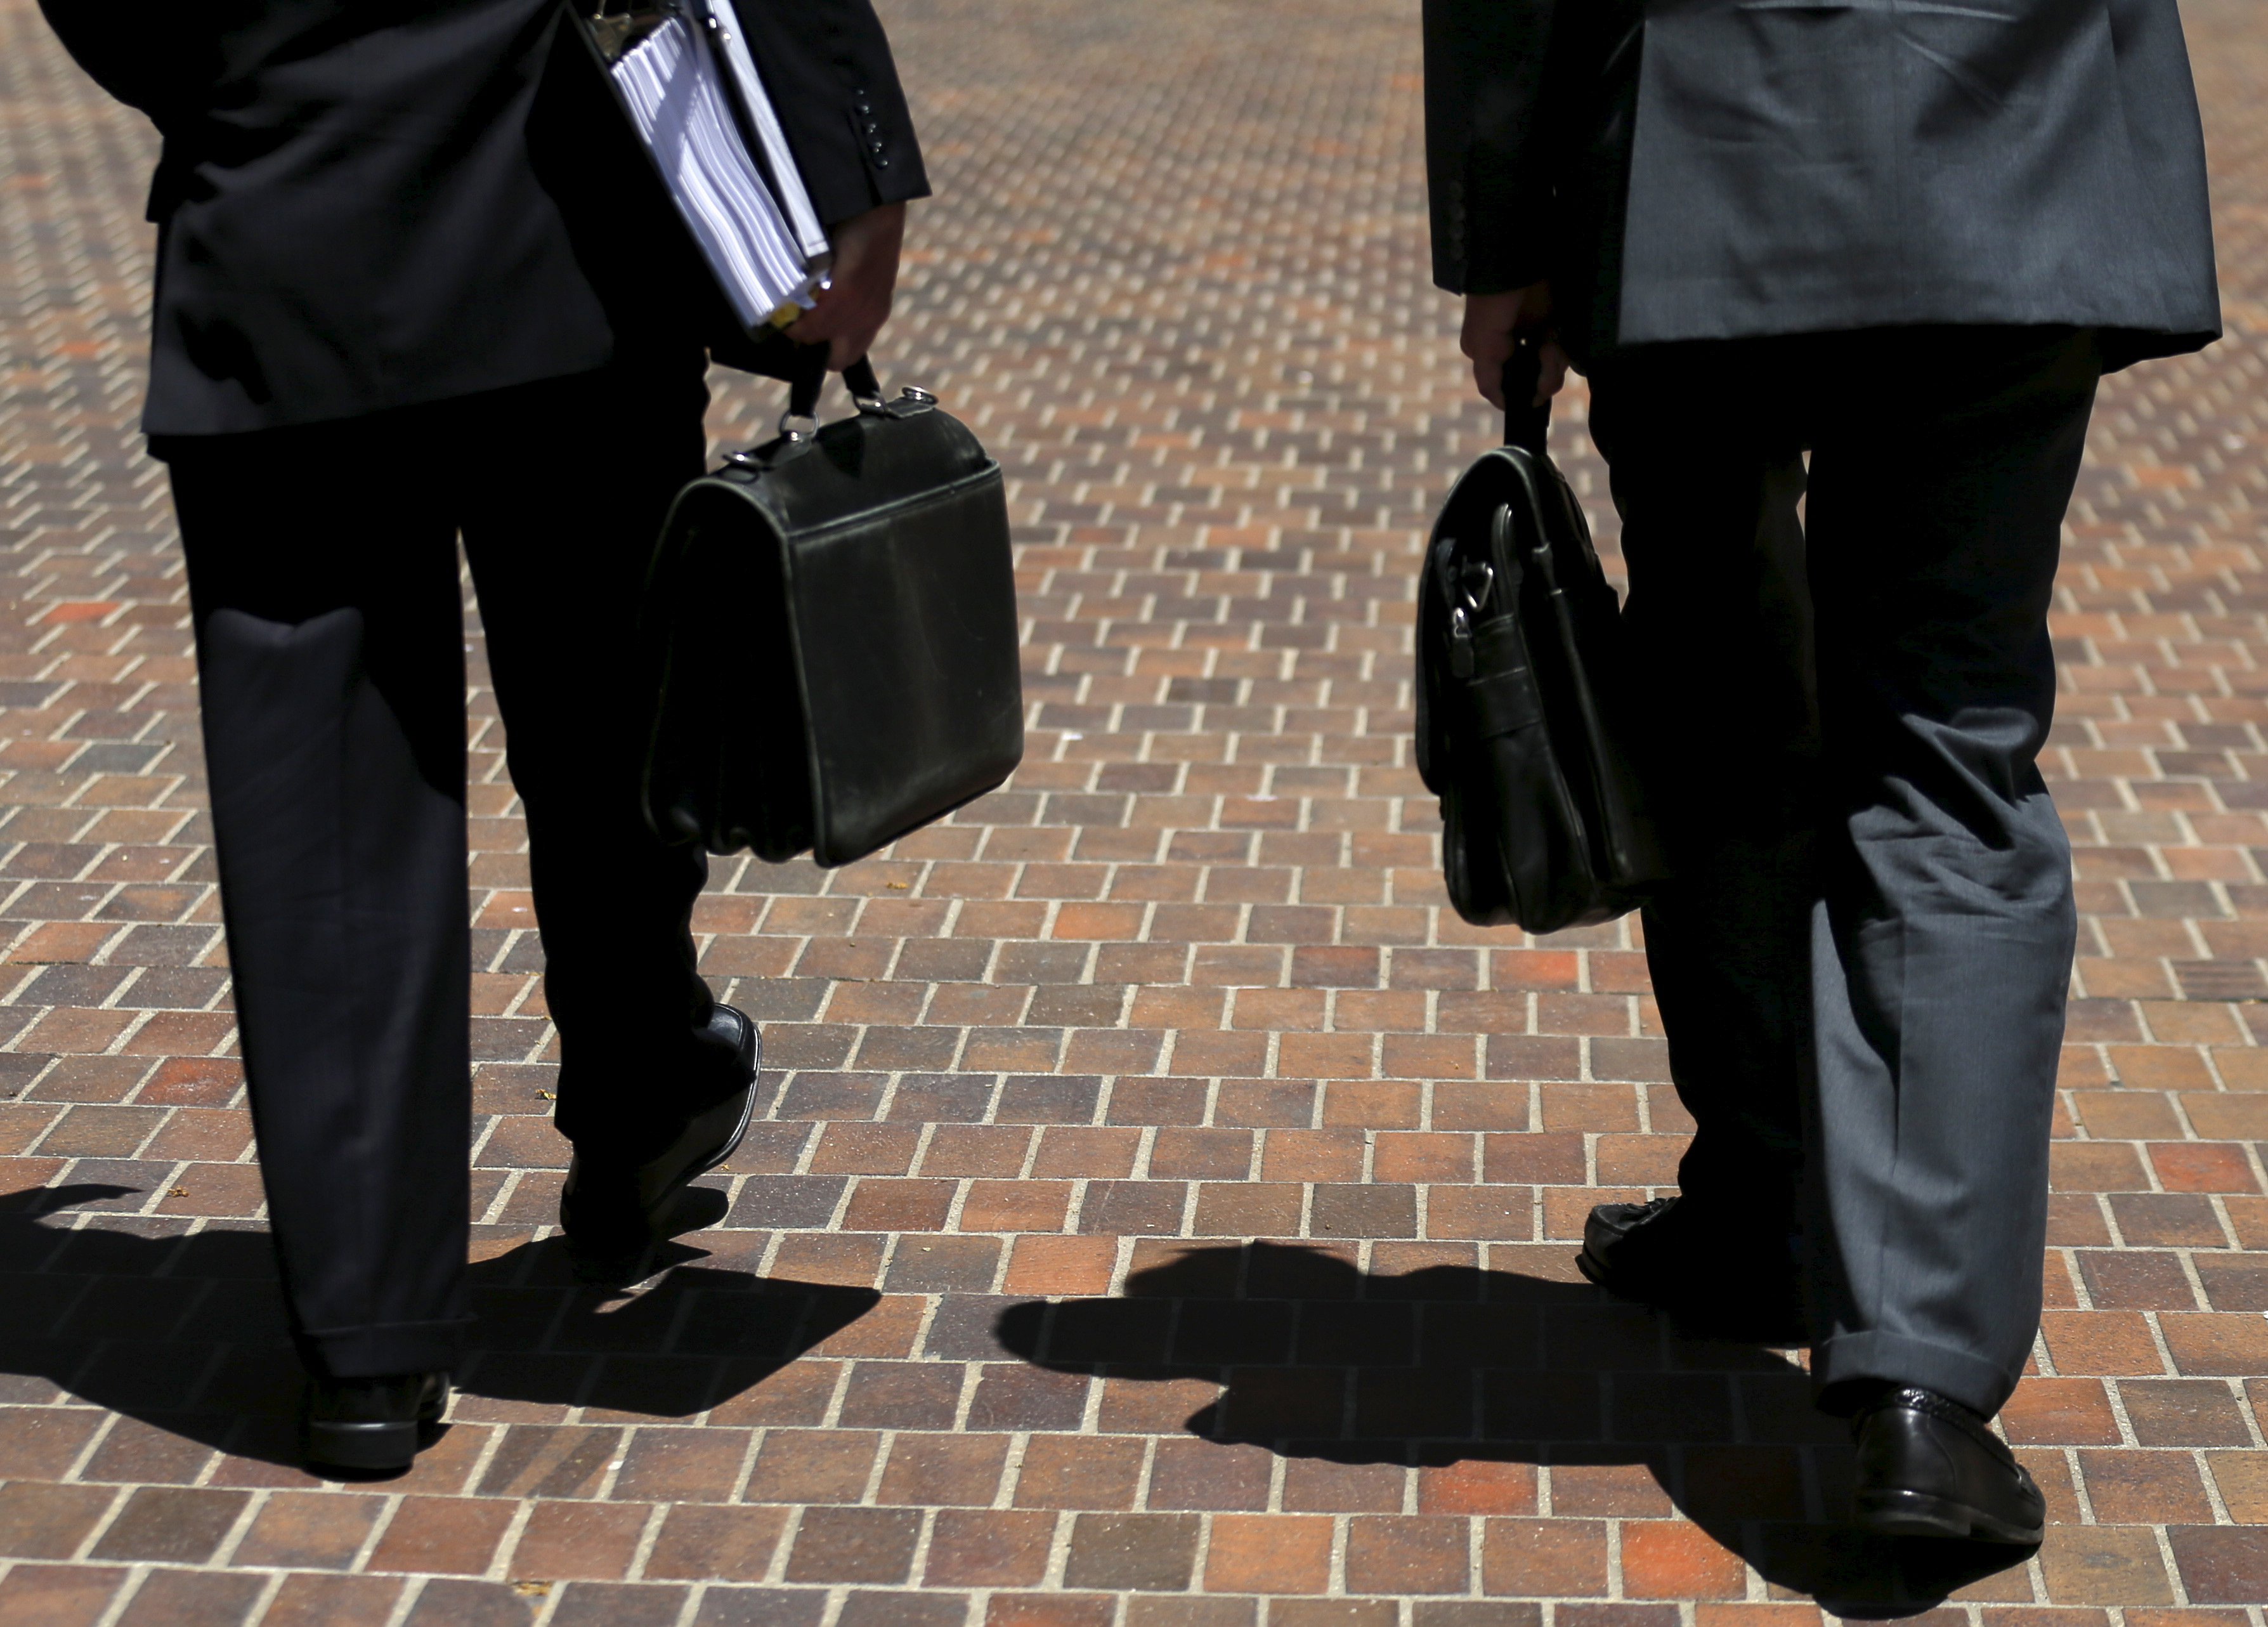 Lawyers walk with their briefcases towards the federal court house in San Diego, California